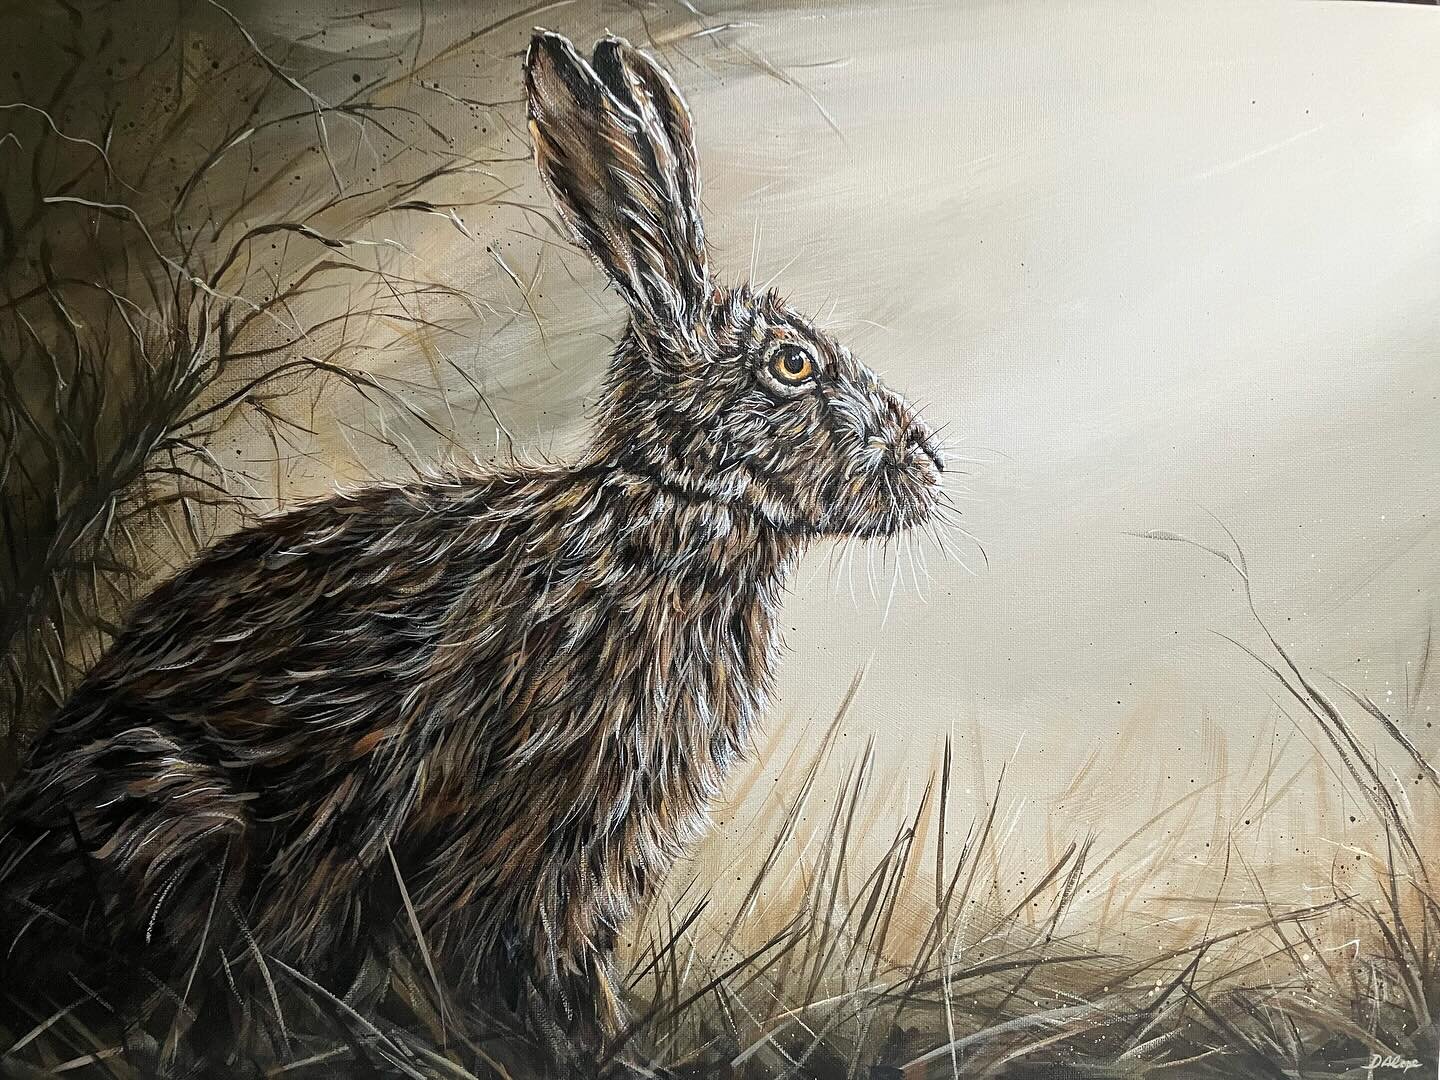 New - &lsquo;March Hare&rsquo; loved painting this hare and trying to create an air of morning light just breaking. Special thanks to @kcb_myphotgraphyjourney for the inspiration, do visit Karen&rsquo;s page to see some amazing wildlife photography. 